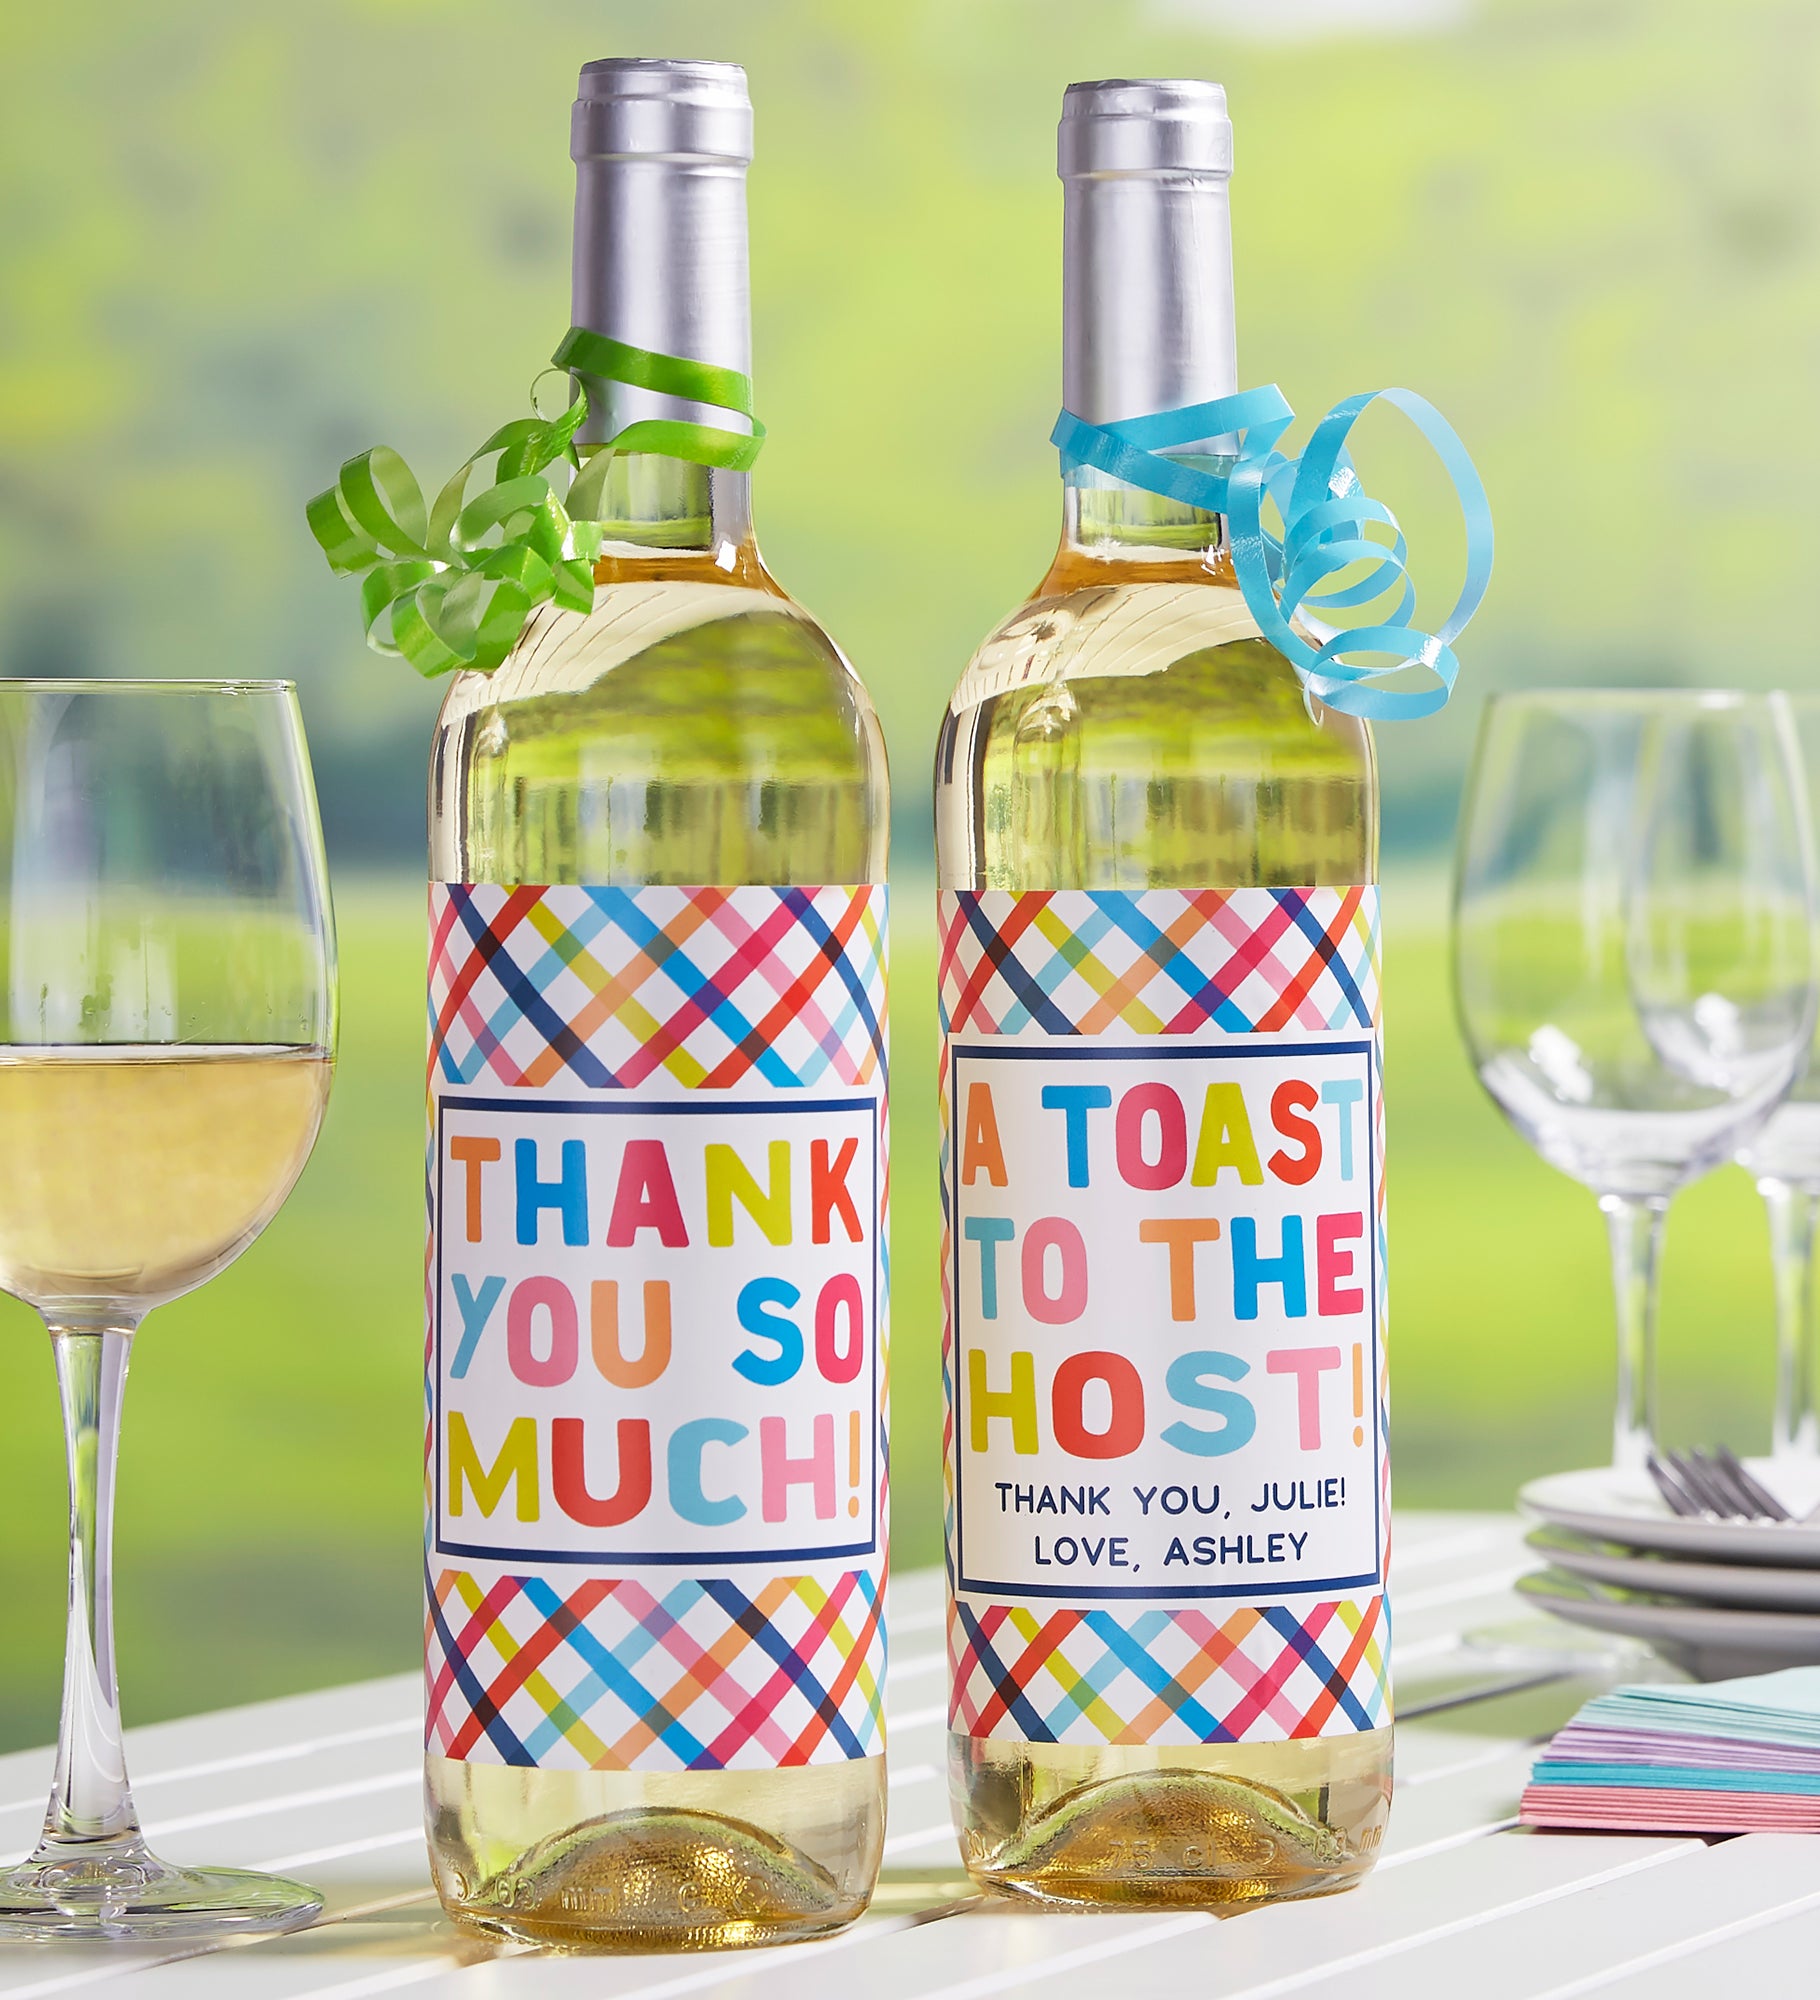 Thanks From... Personalized Wine Bottle Label